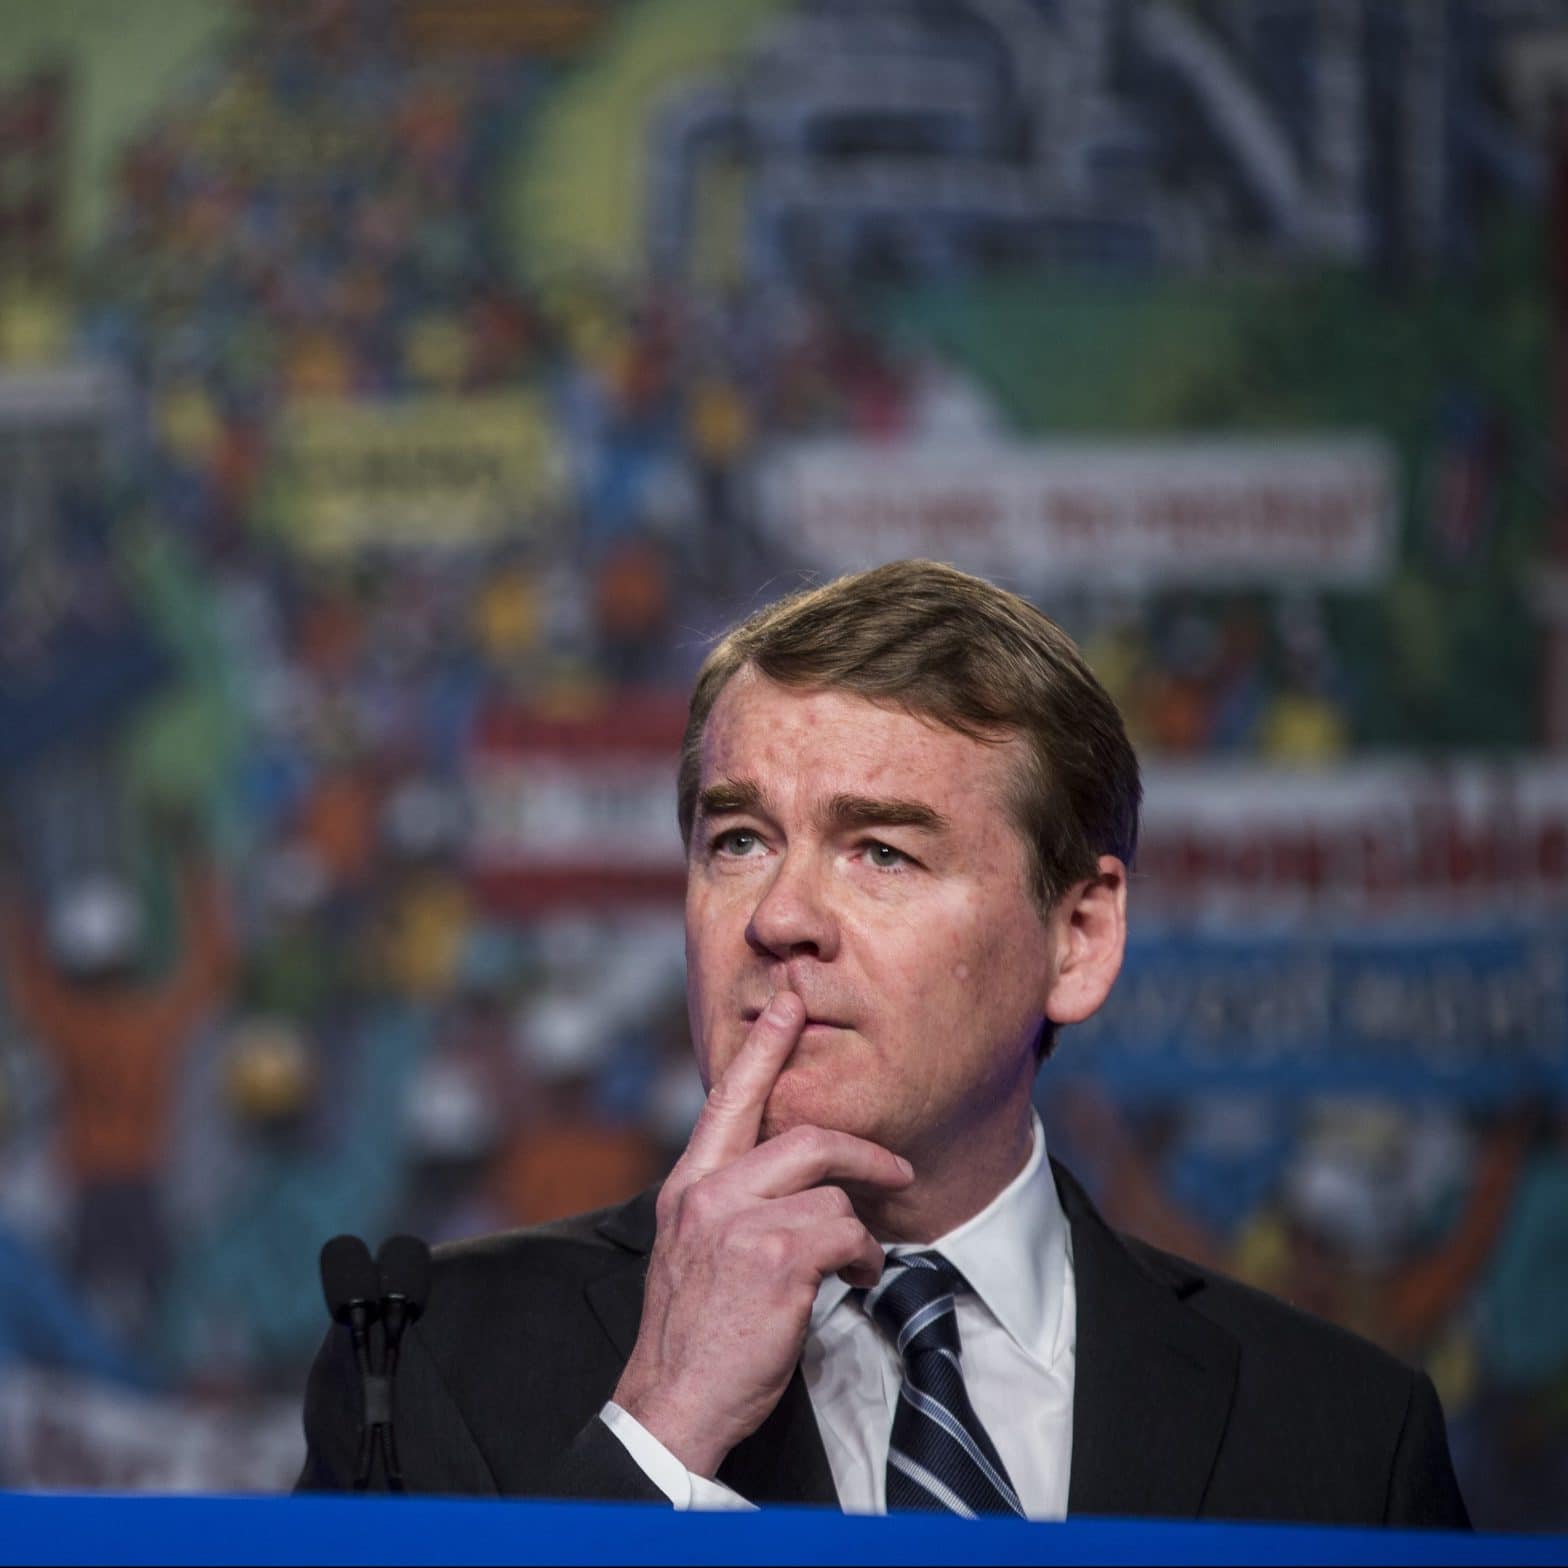 Colorado Senator Michael Bennet’s Ambitious Presidential Campaign Focuses on Pragmatic Solutions for All Americans